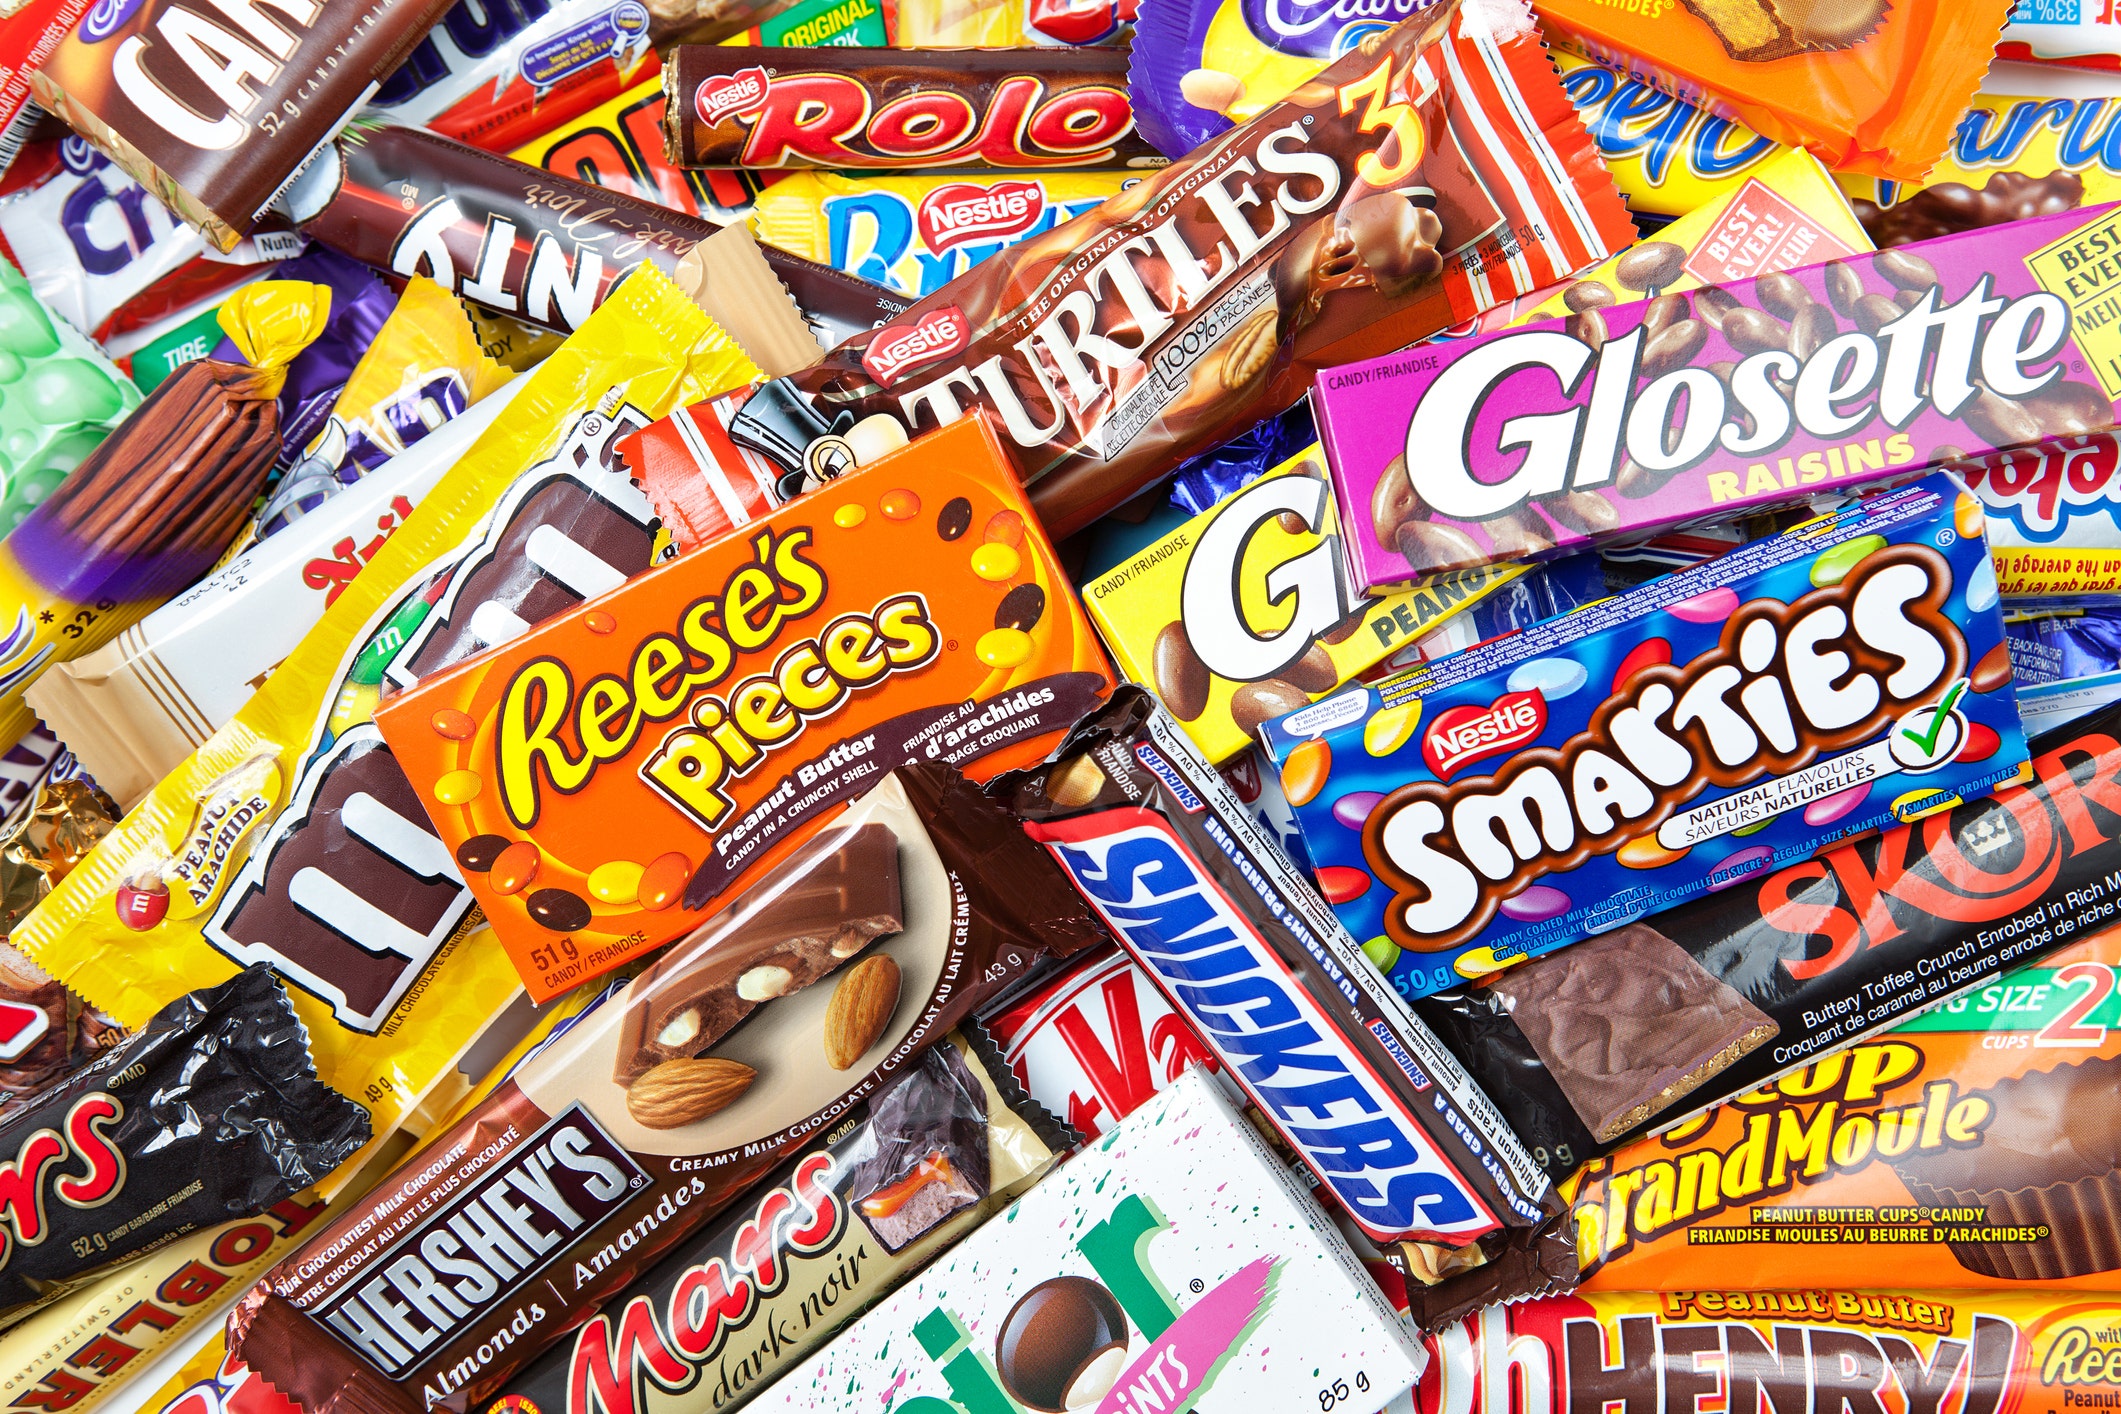 Candy Company pays $ 30 per hour to eat, review sweets